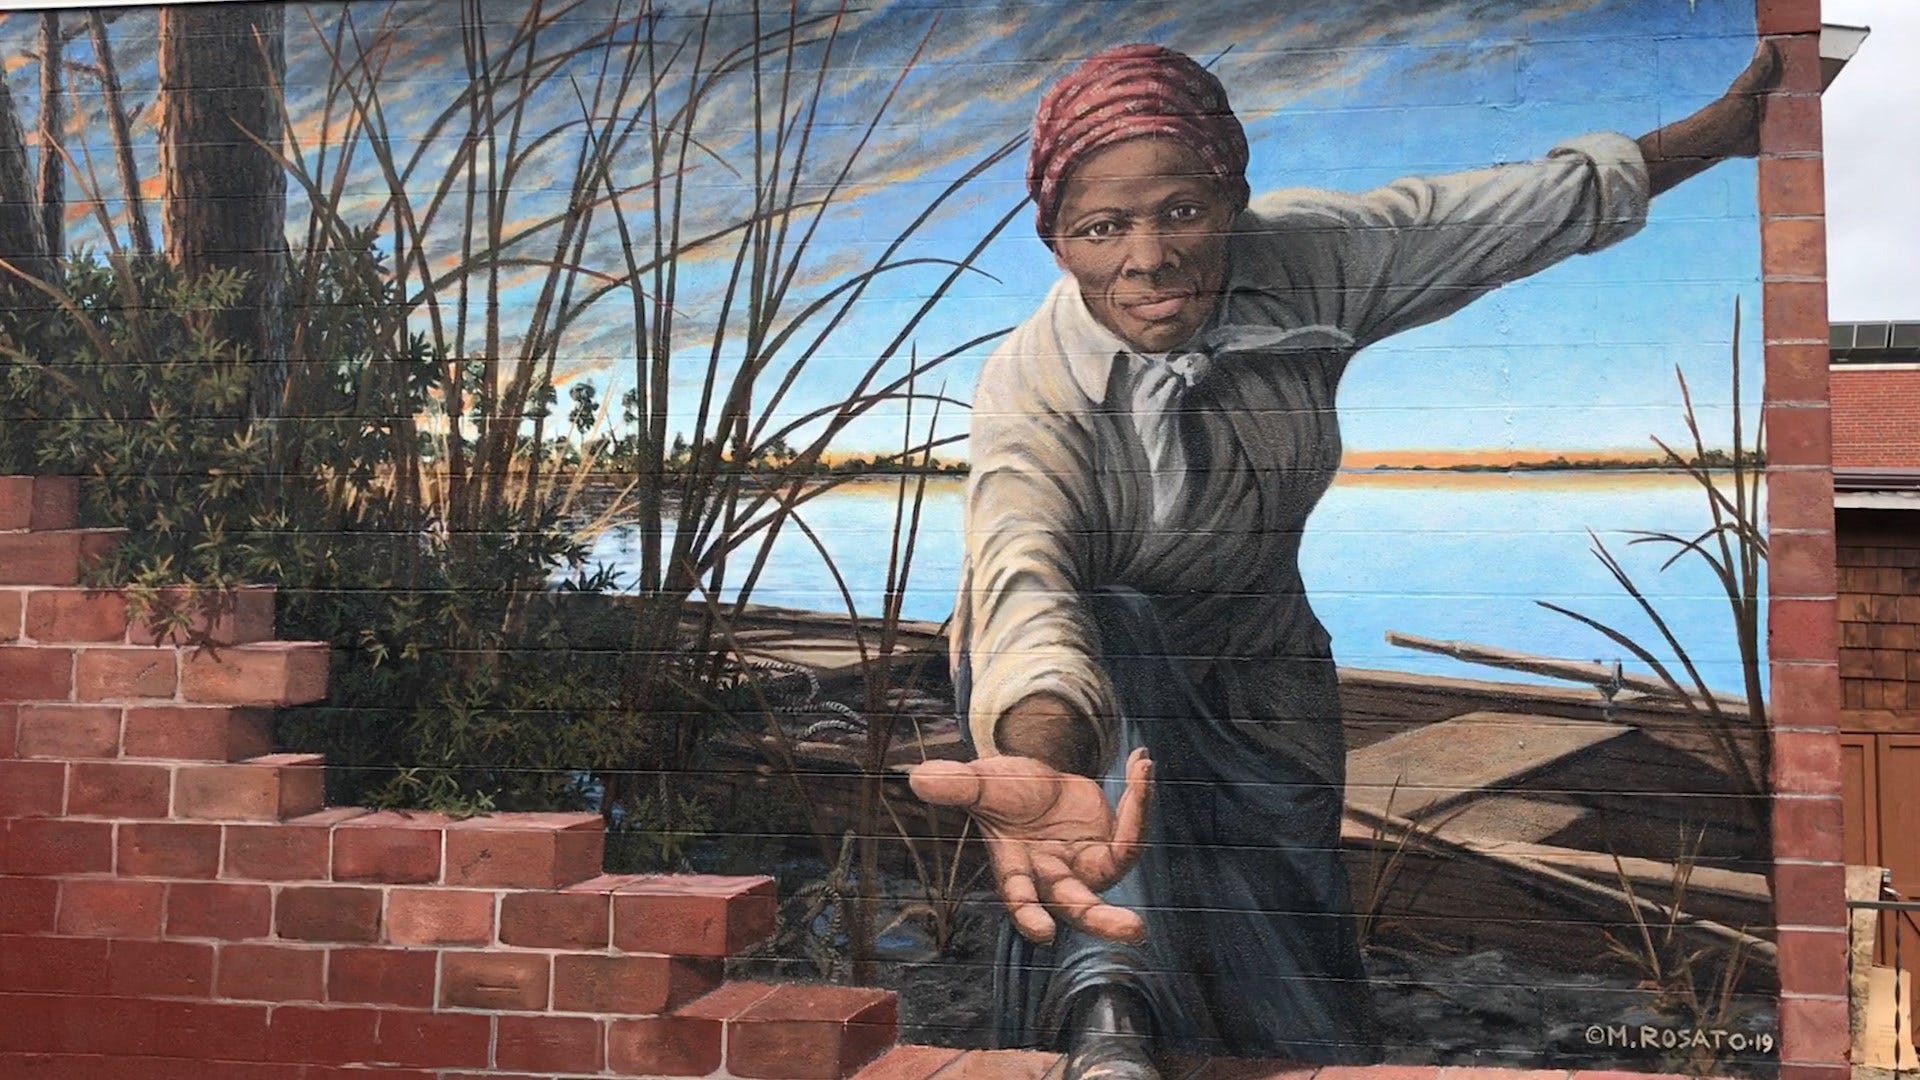 Twenty Dollars and Change: Harriet Tubman and the Ongoing Fight for Racial Justice and Democracy